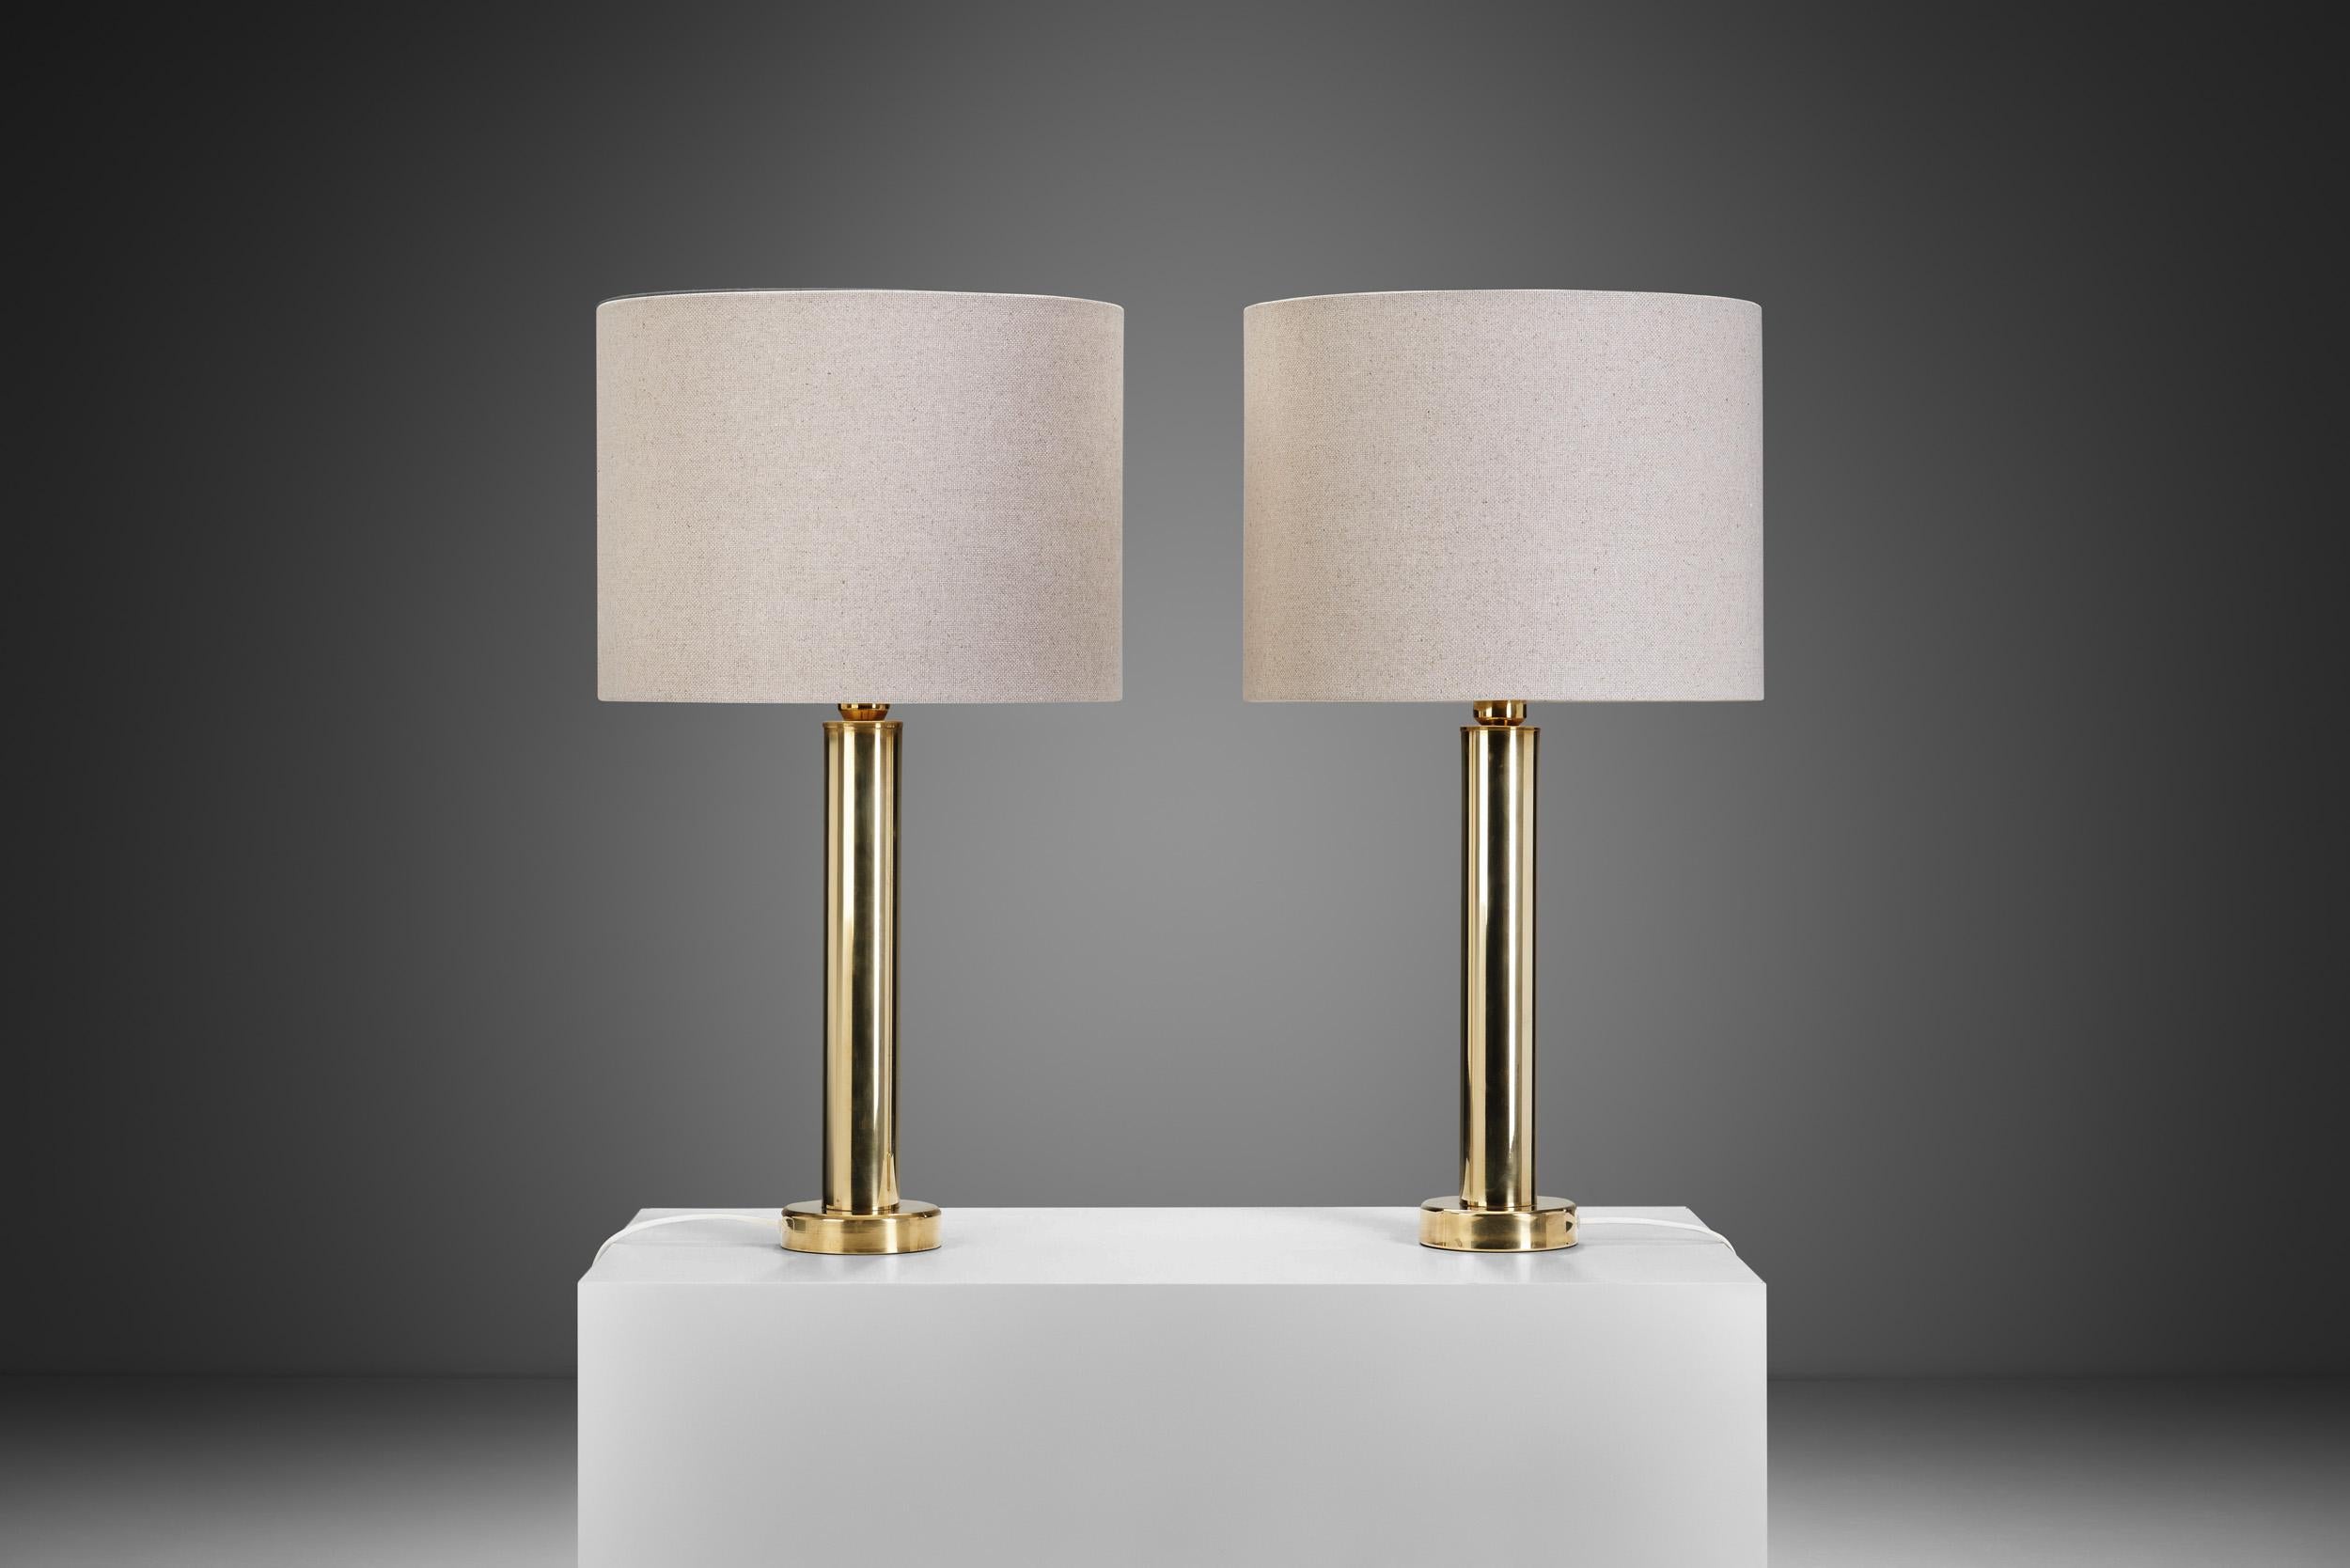 Mid-20th Century Large Swedish Modern Brass Table Lamps by Kosta Elarmatur, Sweden ca 1960s For Sale